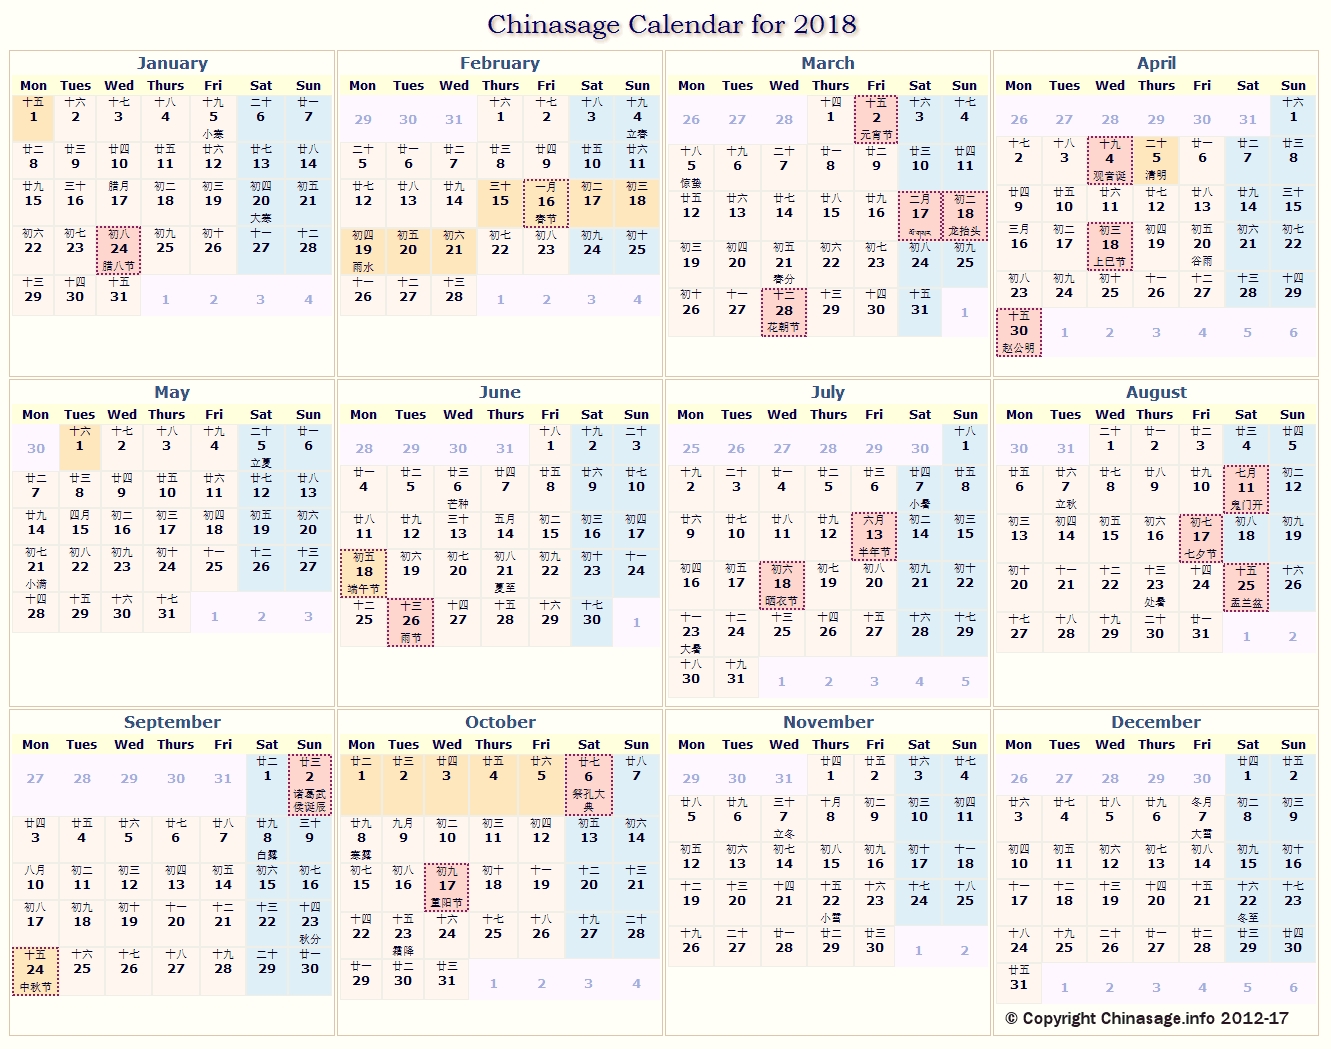 Calendar Of Chinese Events And Chinese Festivals For Each